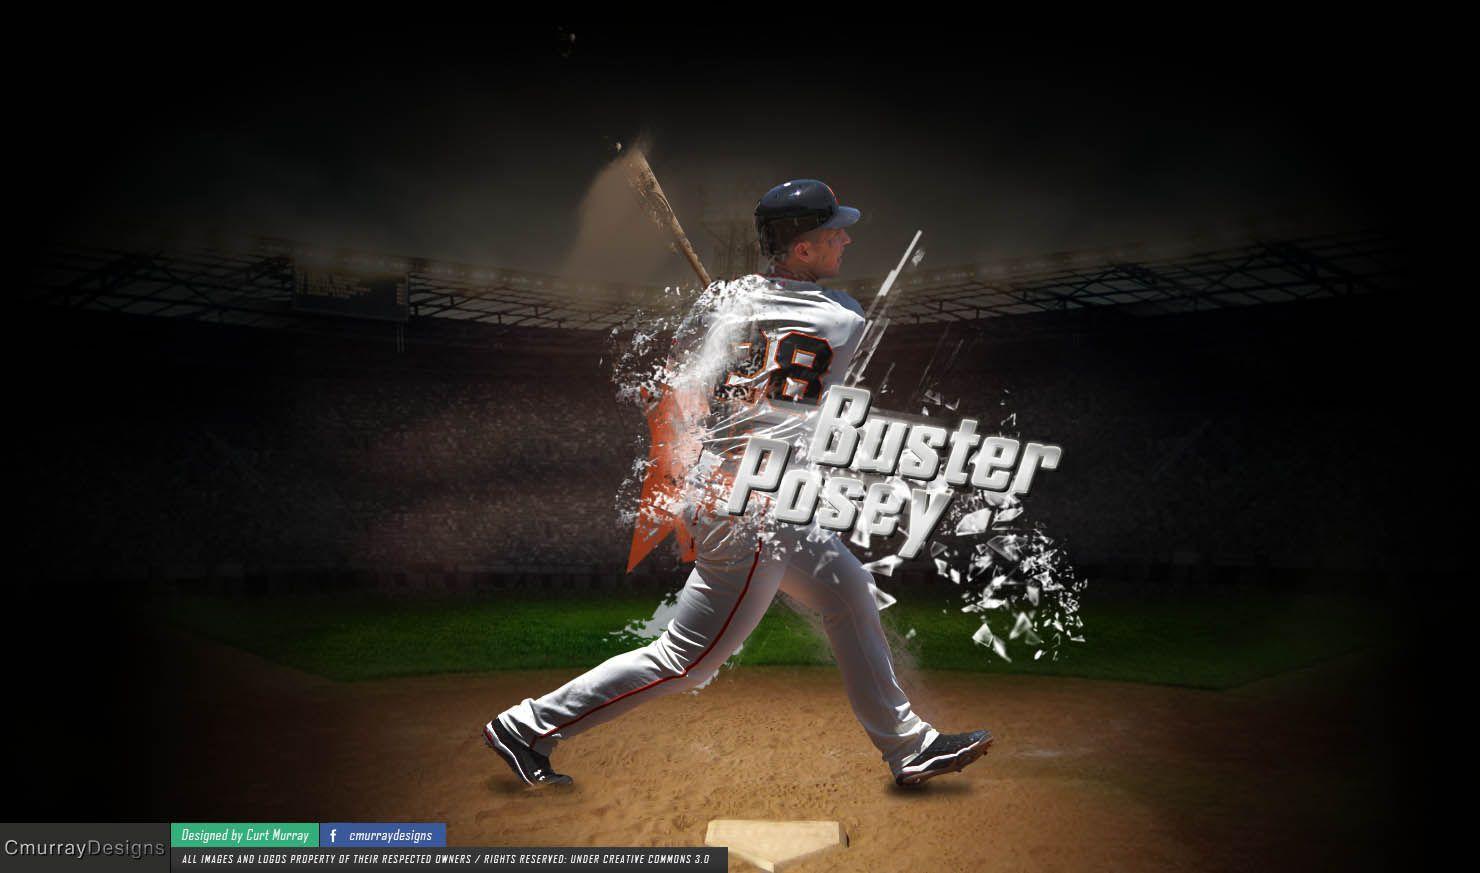 Download wallpapers 4k, Buster Posey, grunge art, San Francisco Giants,  MLB, baseman, baseball, Gerald Dempsey Posey III, orange abstract rays, Buster  Posey San Francisco Giants, Buster Posey 4K for desktop free. Pictures